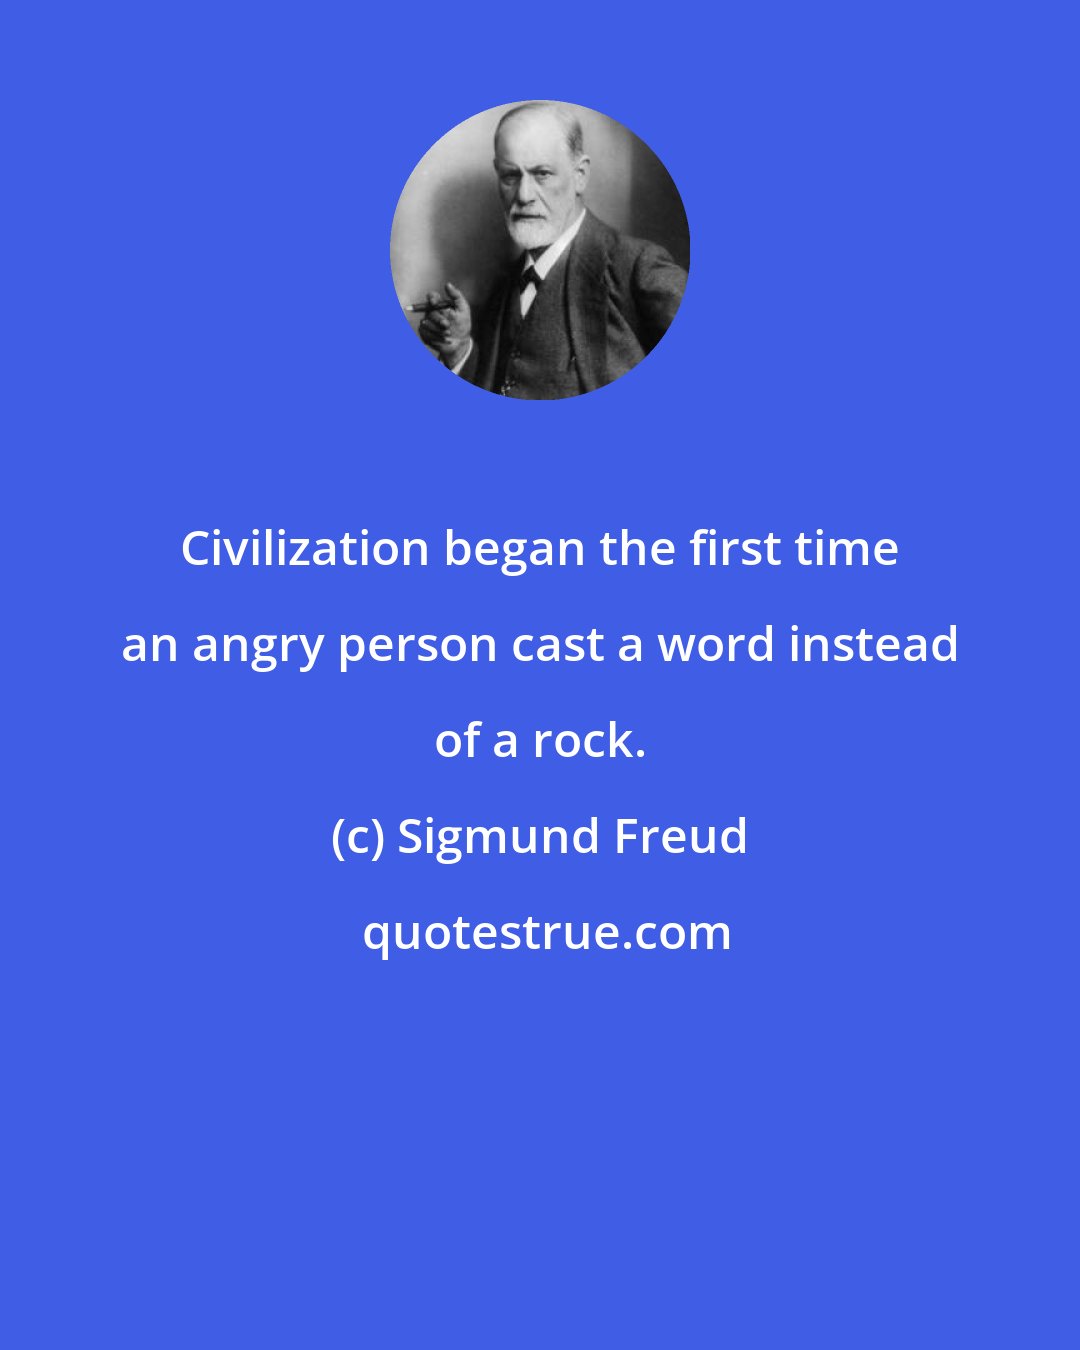 Sigmund Freud: Civilization began the first time an angry person cast a word instead of a rock.